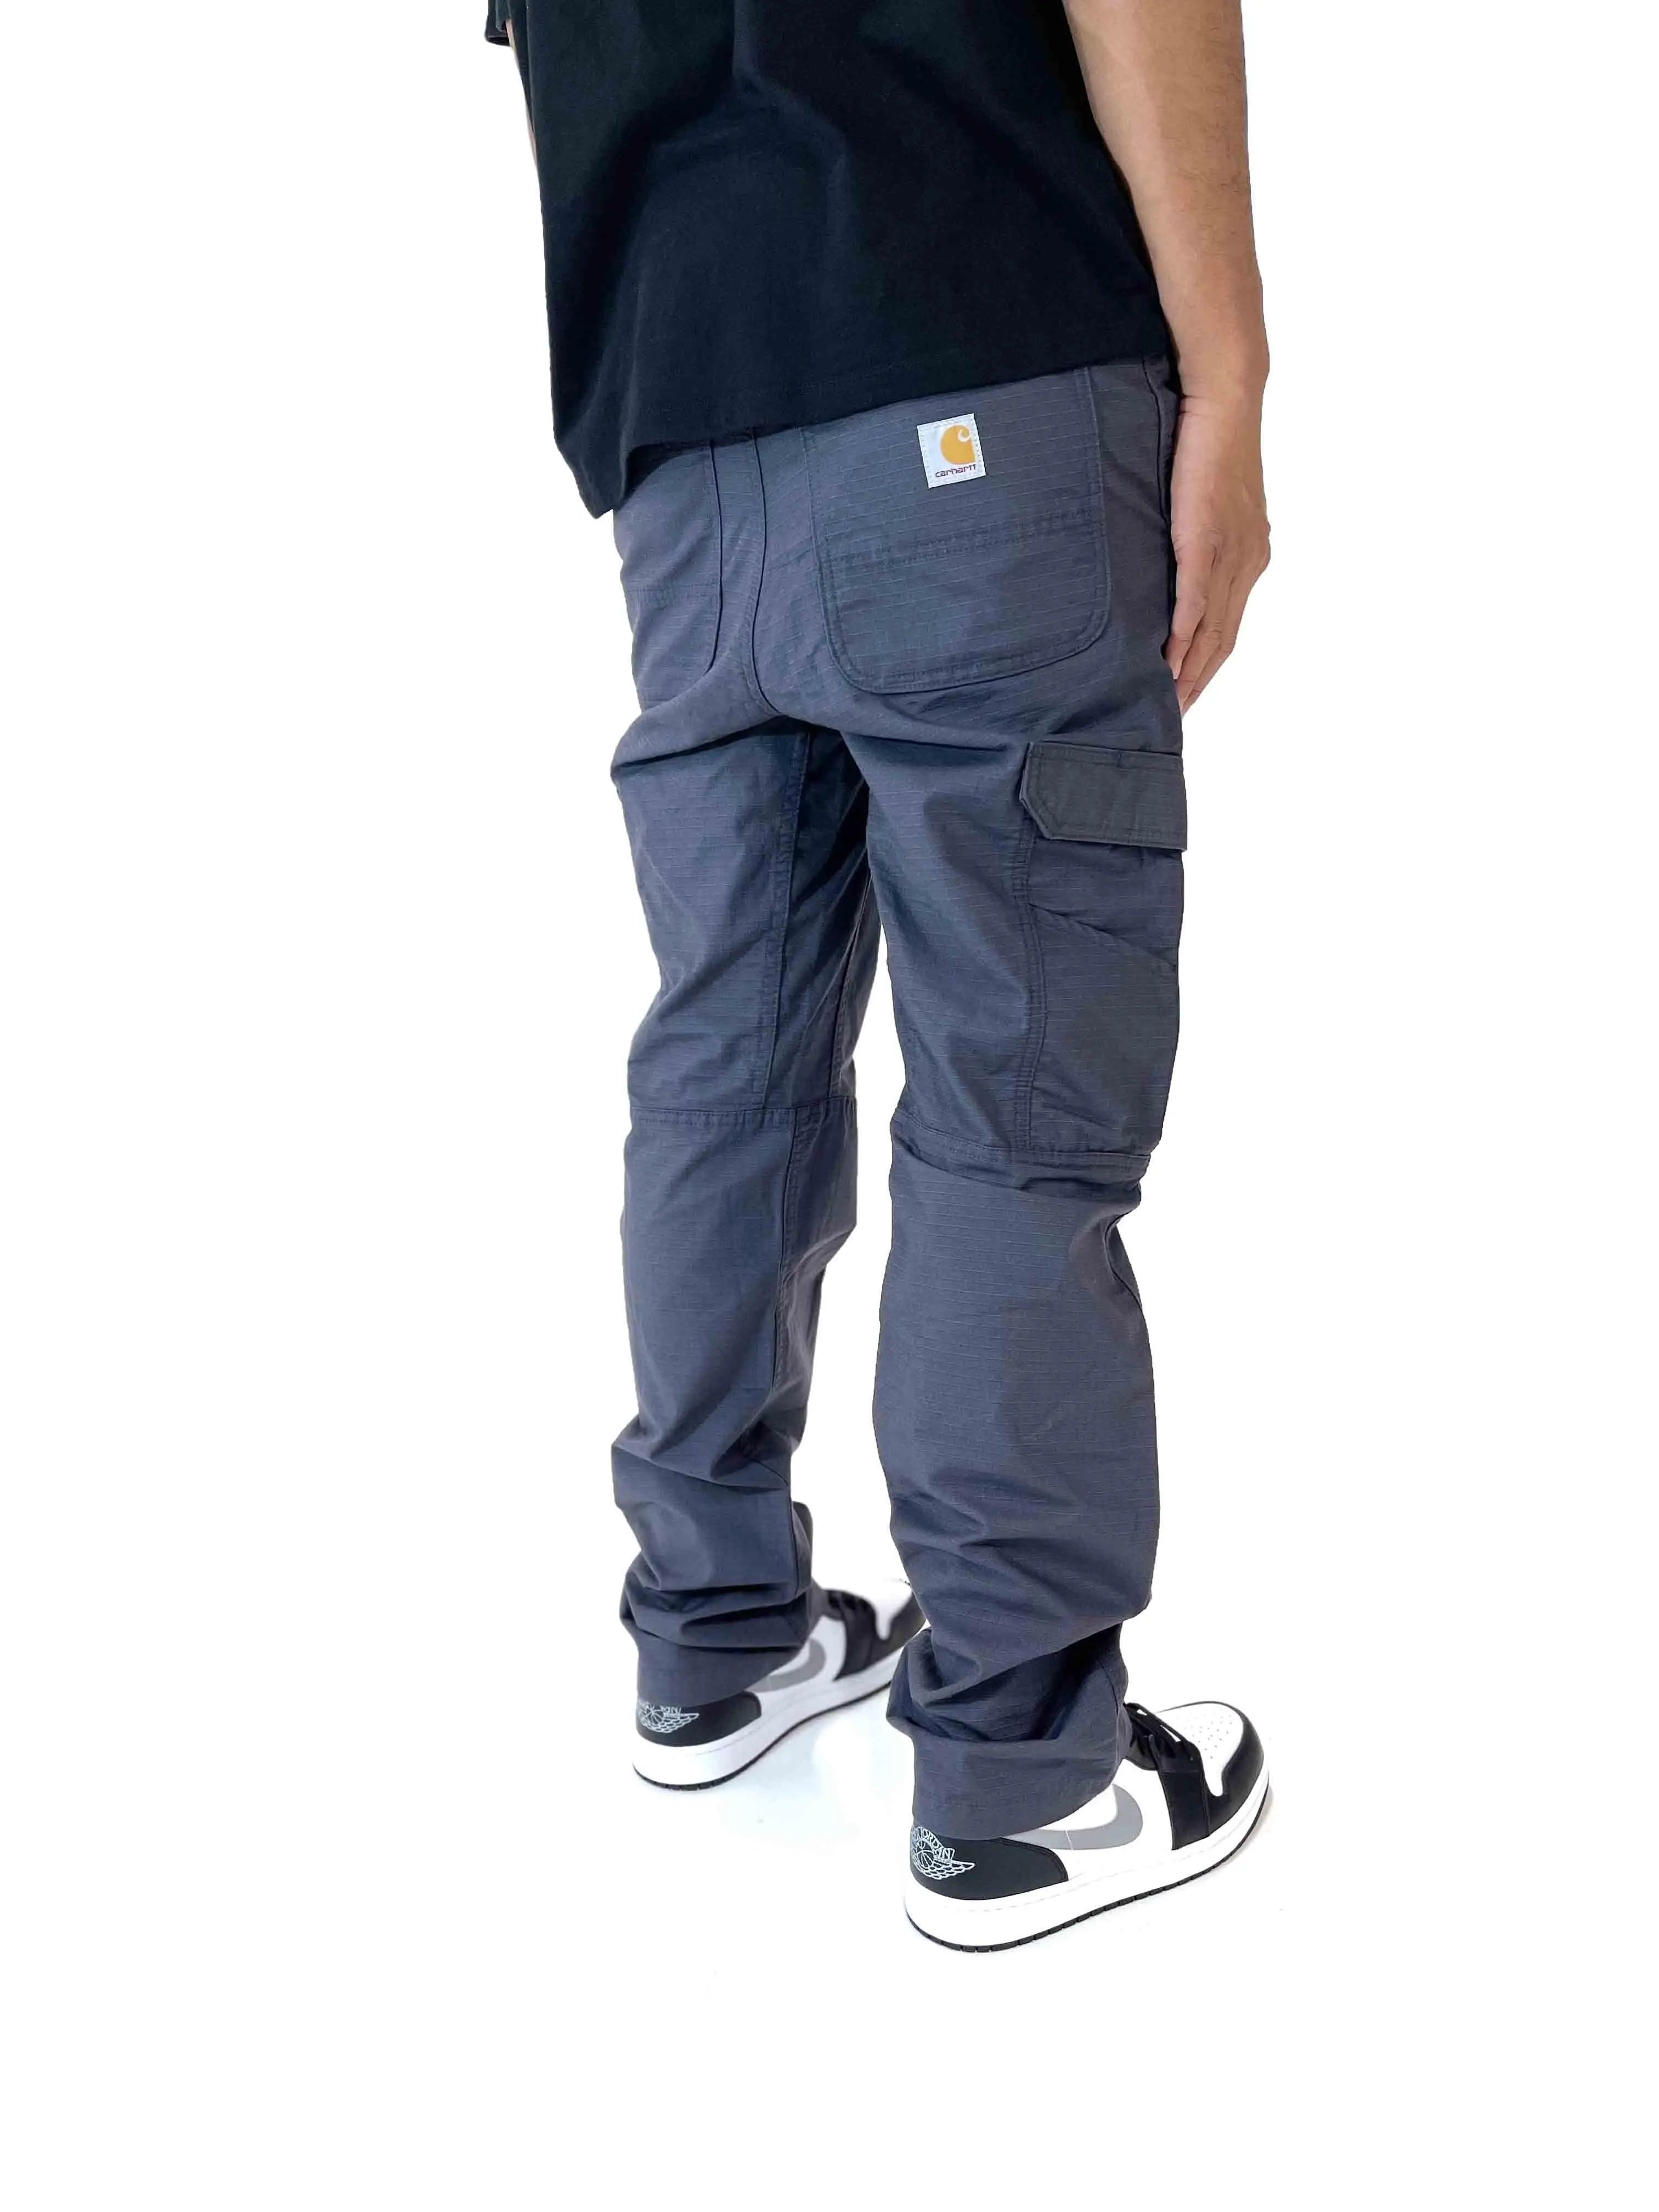 Carhartt Men's Force Relaxed Fit Ripstop Cargo Work Pant, Dark